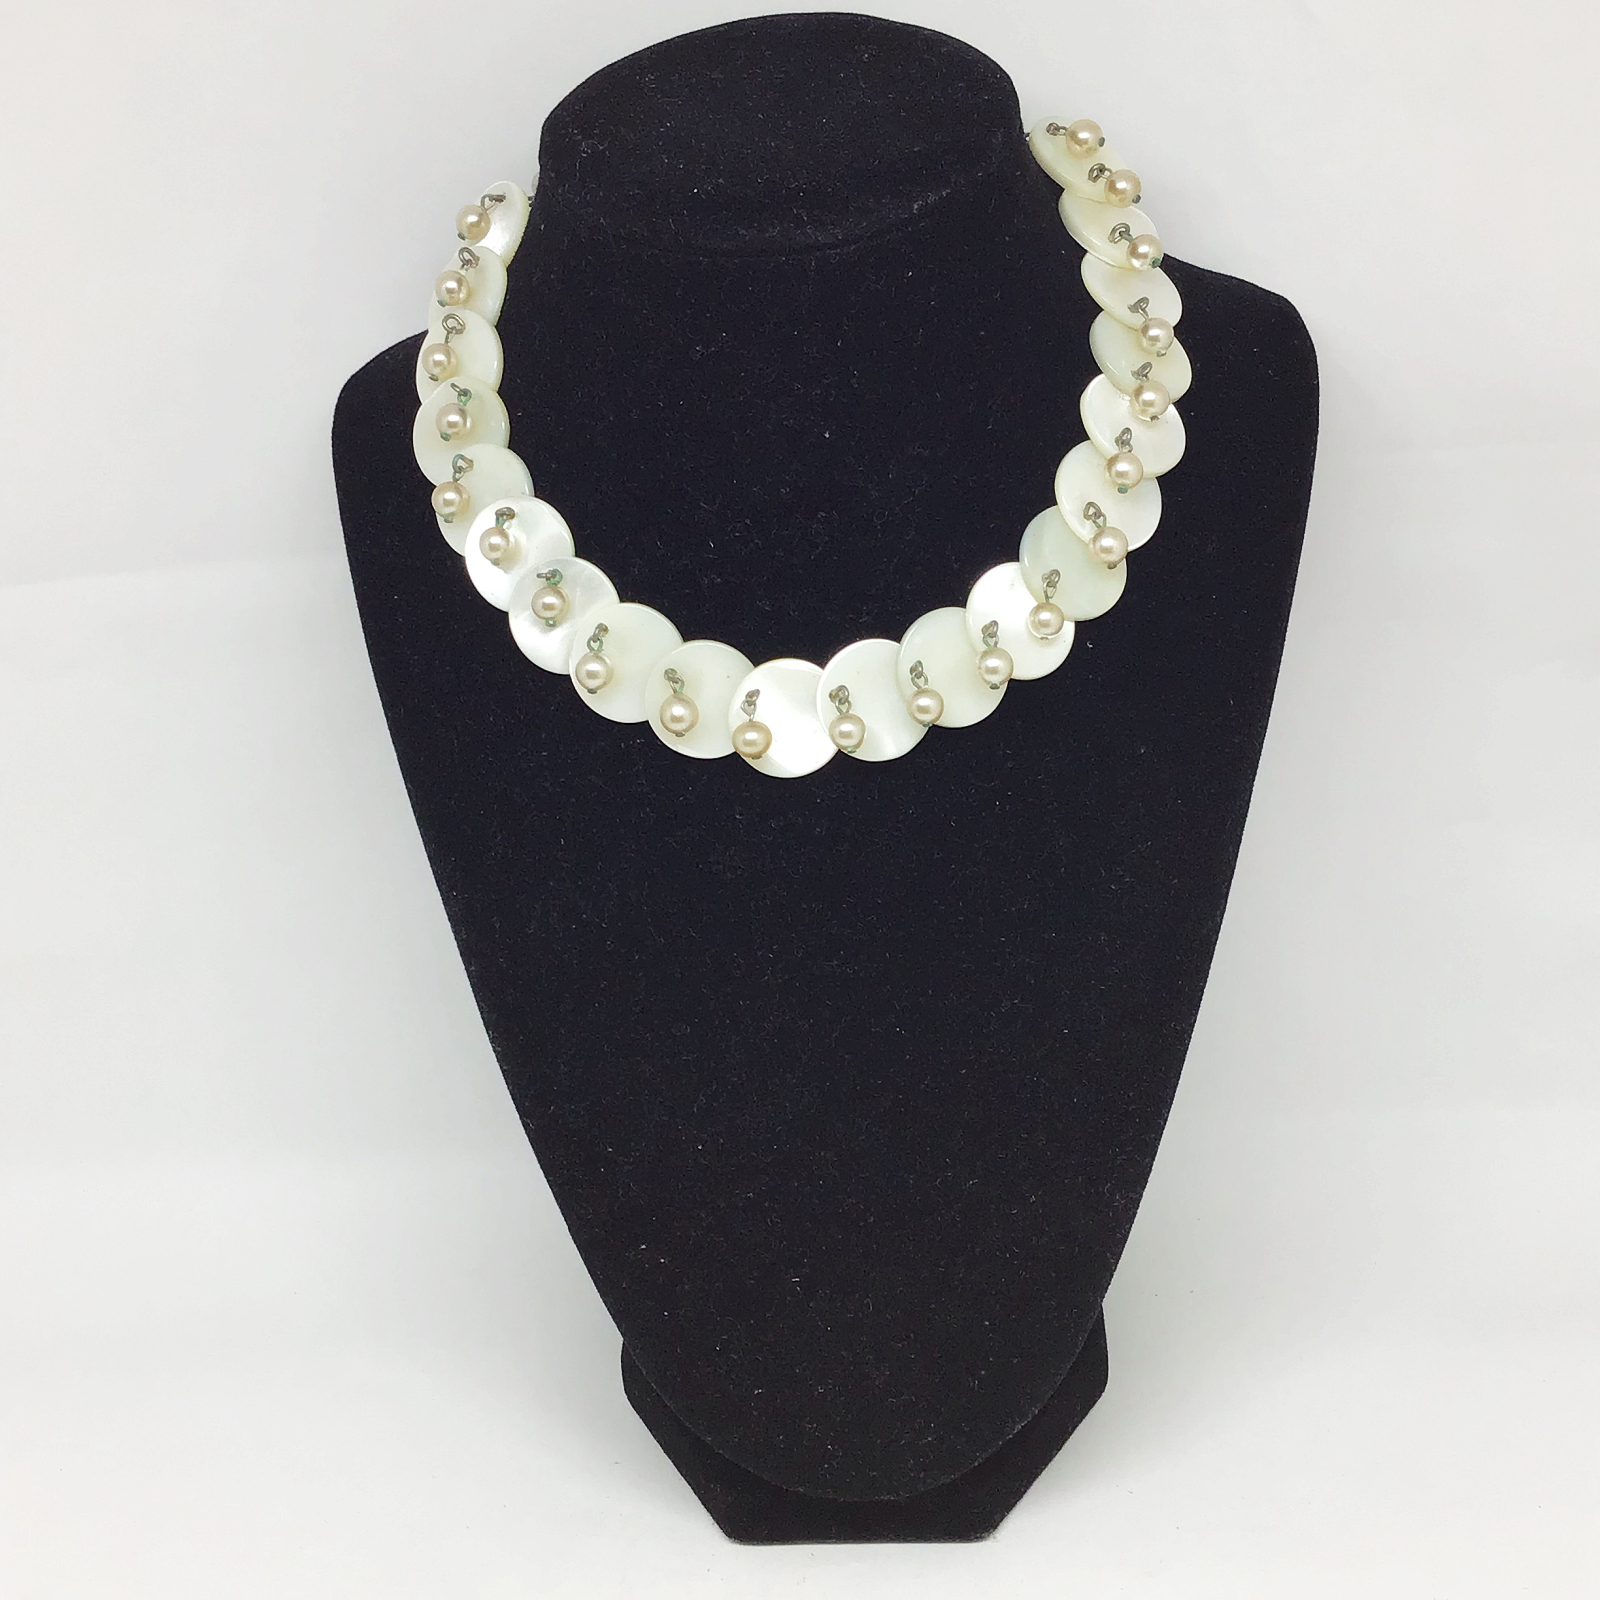 ♦︎ Vintage 15 Mother of Pearl Layered Disc Necklace with Dangling Faux  Pearls on Adjustable Pearl Chain Choker Necklace